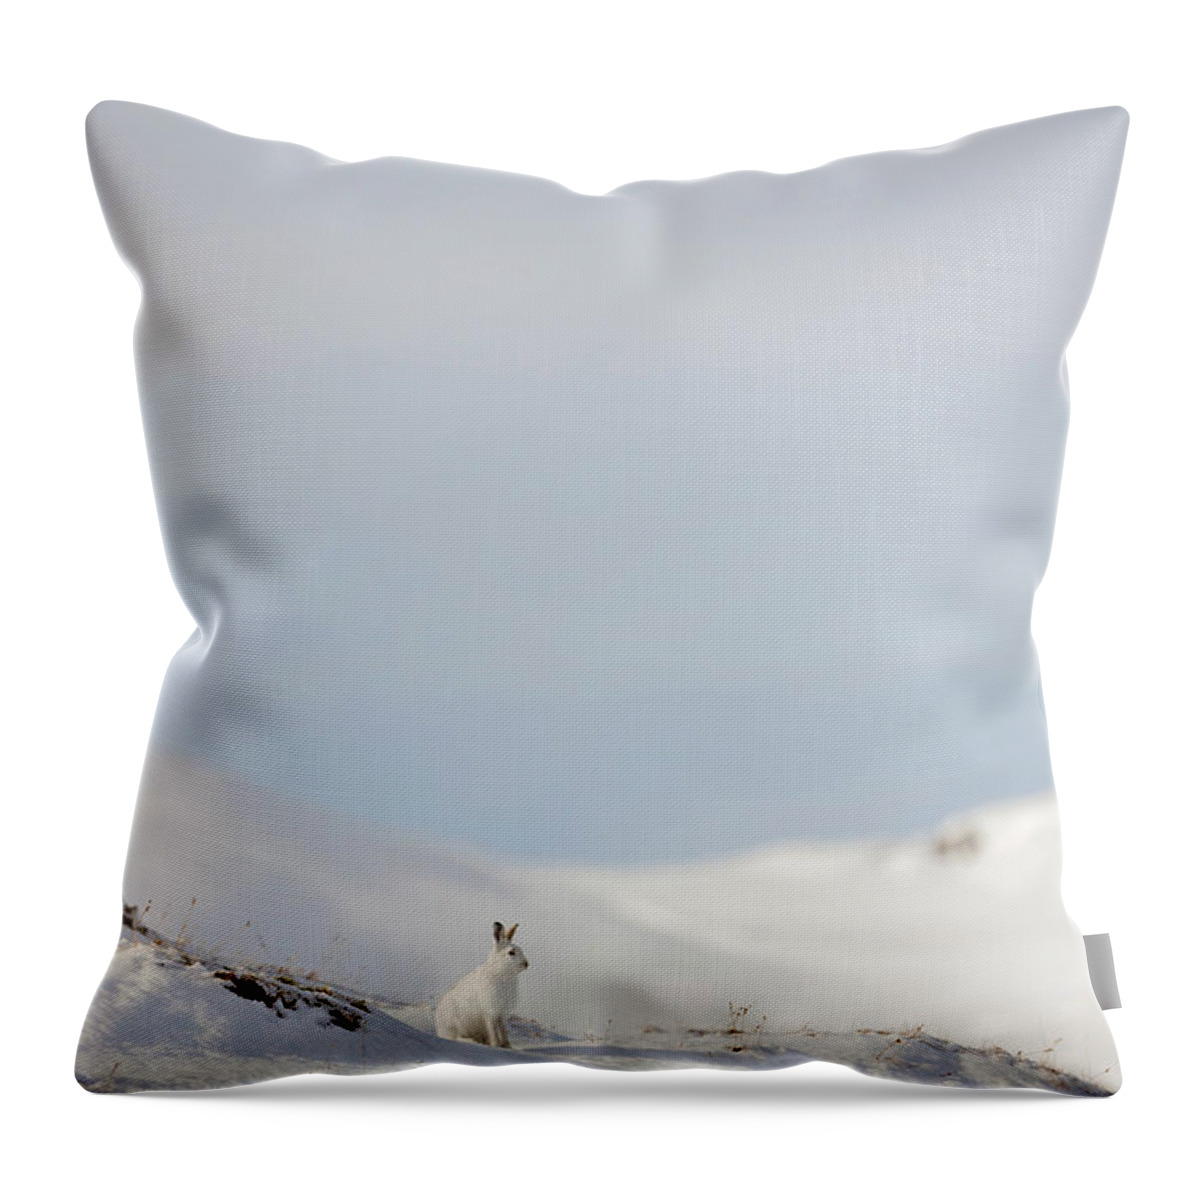 Mountain Throw Pillow featuring the photograph Mountain Hare On Hillside by Pete Walkden